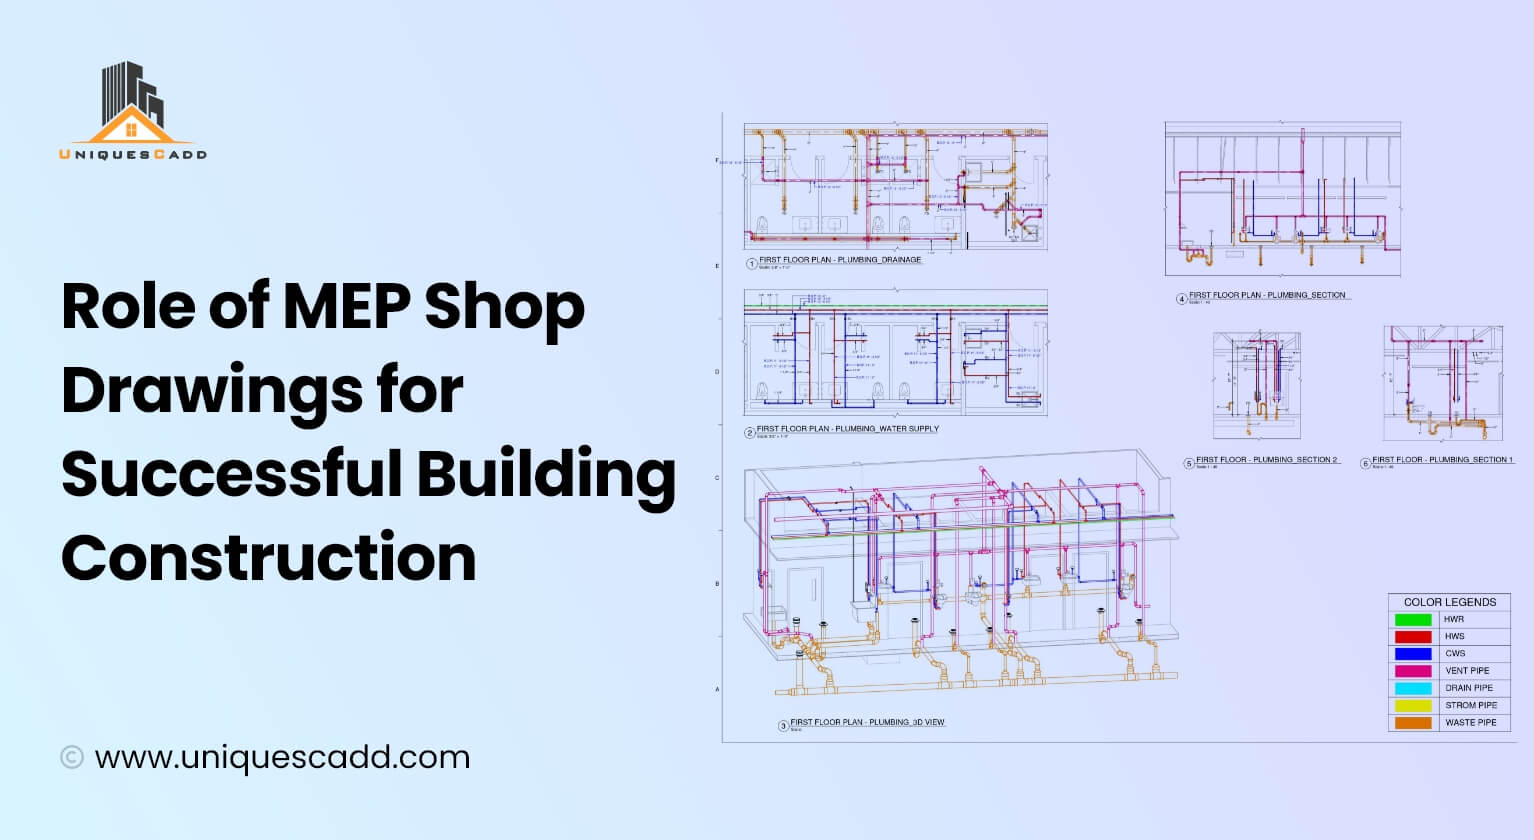 Role of MEP Shop Drawings for Successful Building Construction